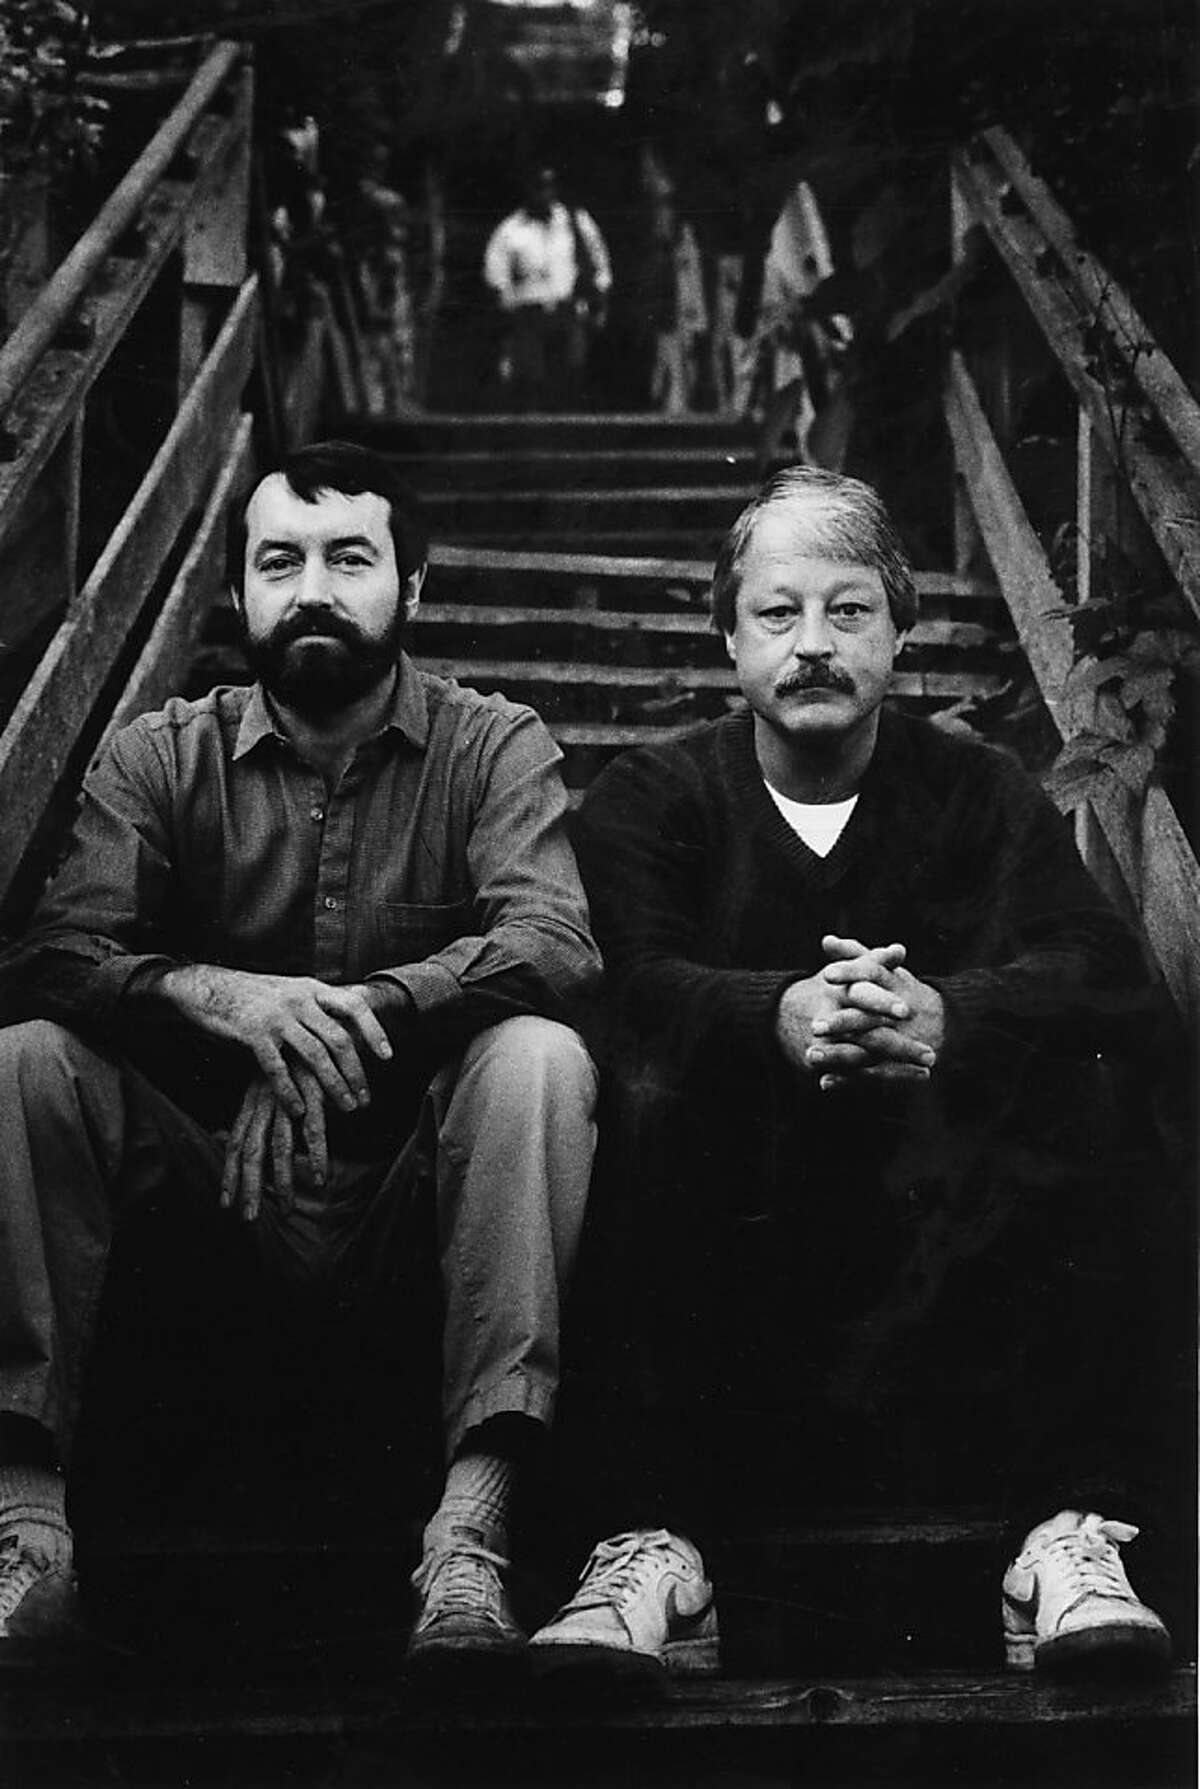 Gary Kray (right) sits on the Filbert Street steps in 1985 with Larry Habegger, who with his wife will take over the gardening.